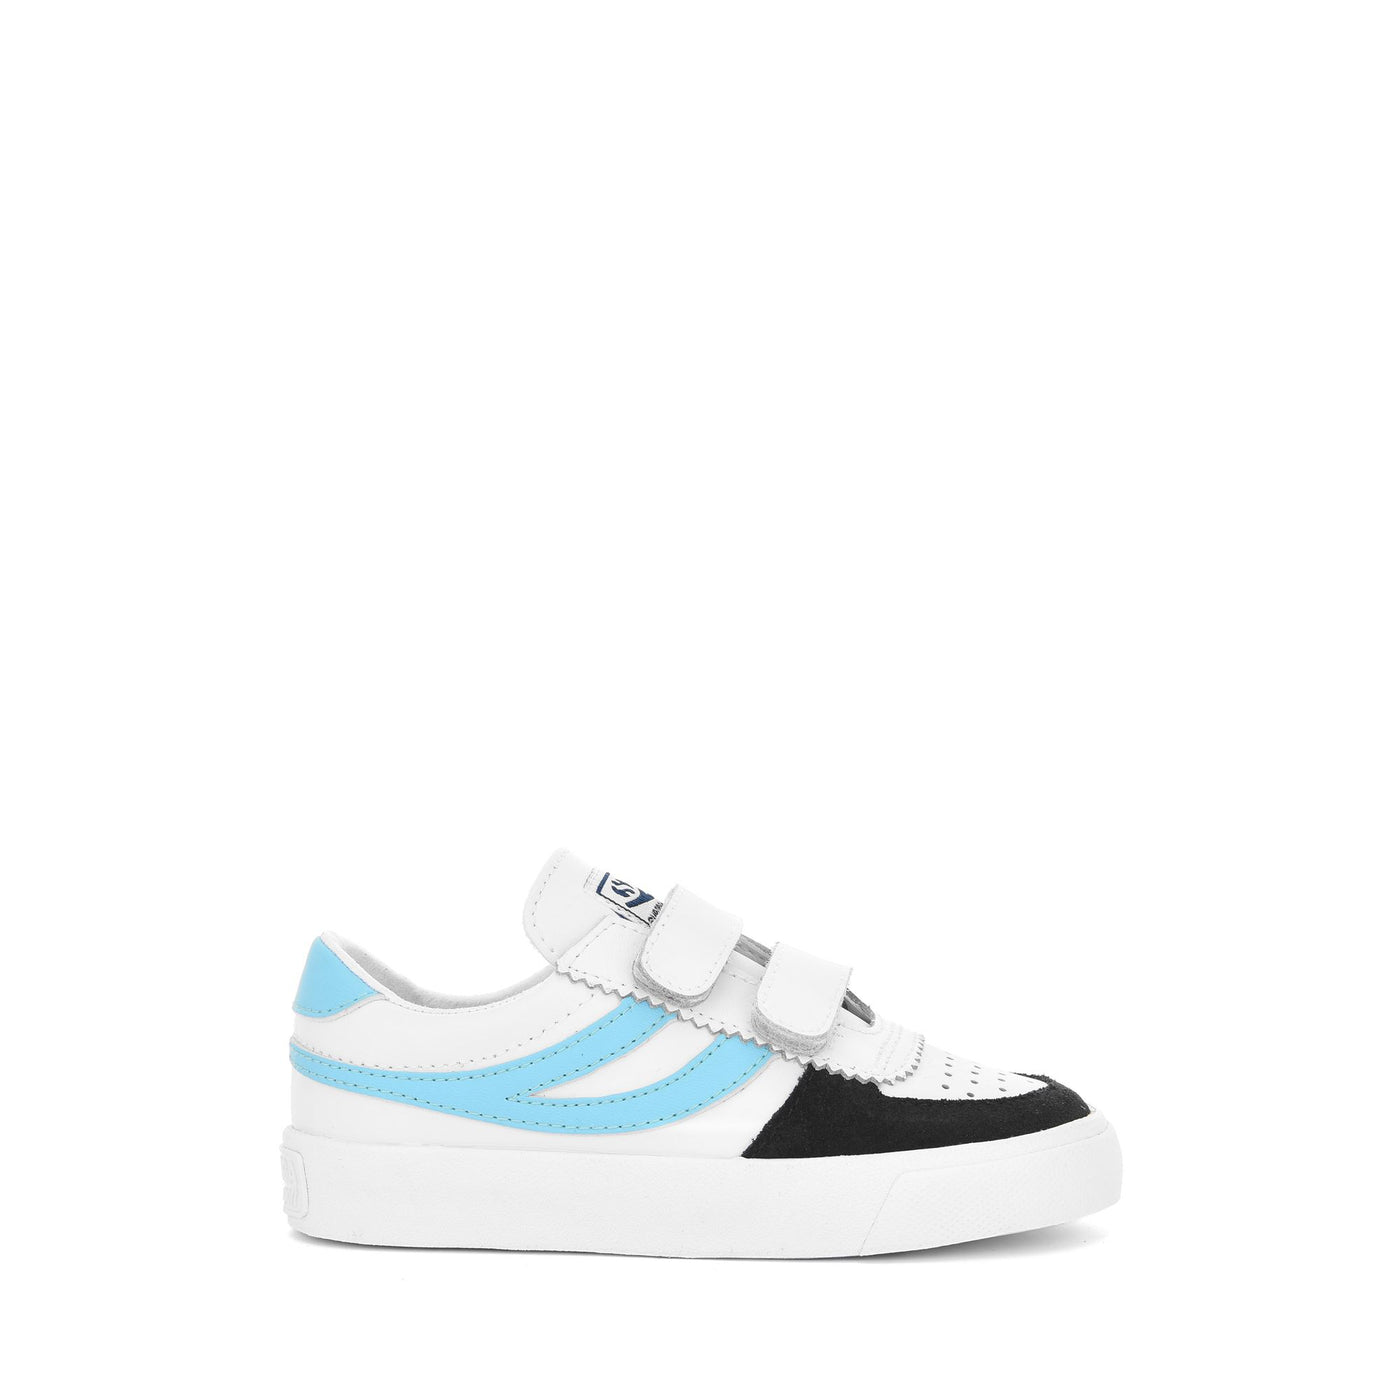 Sneakers Kid unisex 2846 KIDS SEATTLE STRAPS ACTION LEATHER Low Cut WHITE-BLUE FISH-NAVY Photo (jpg Rgb)			